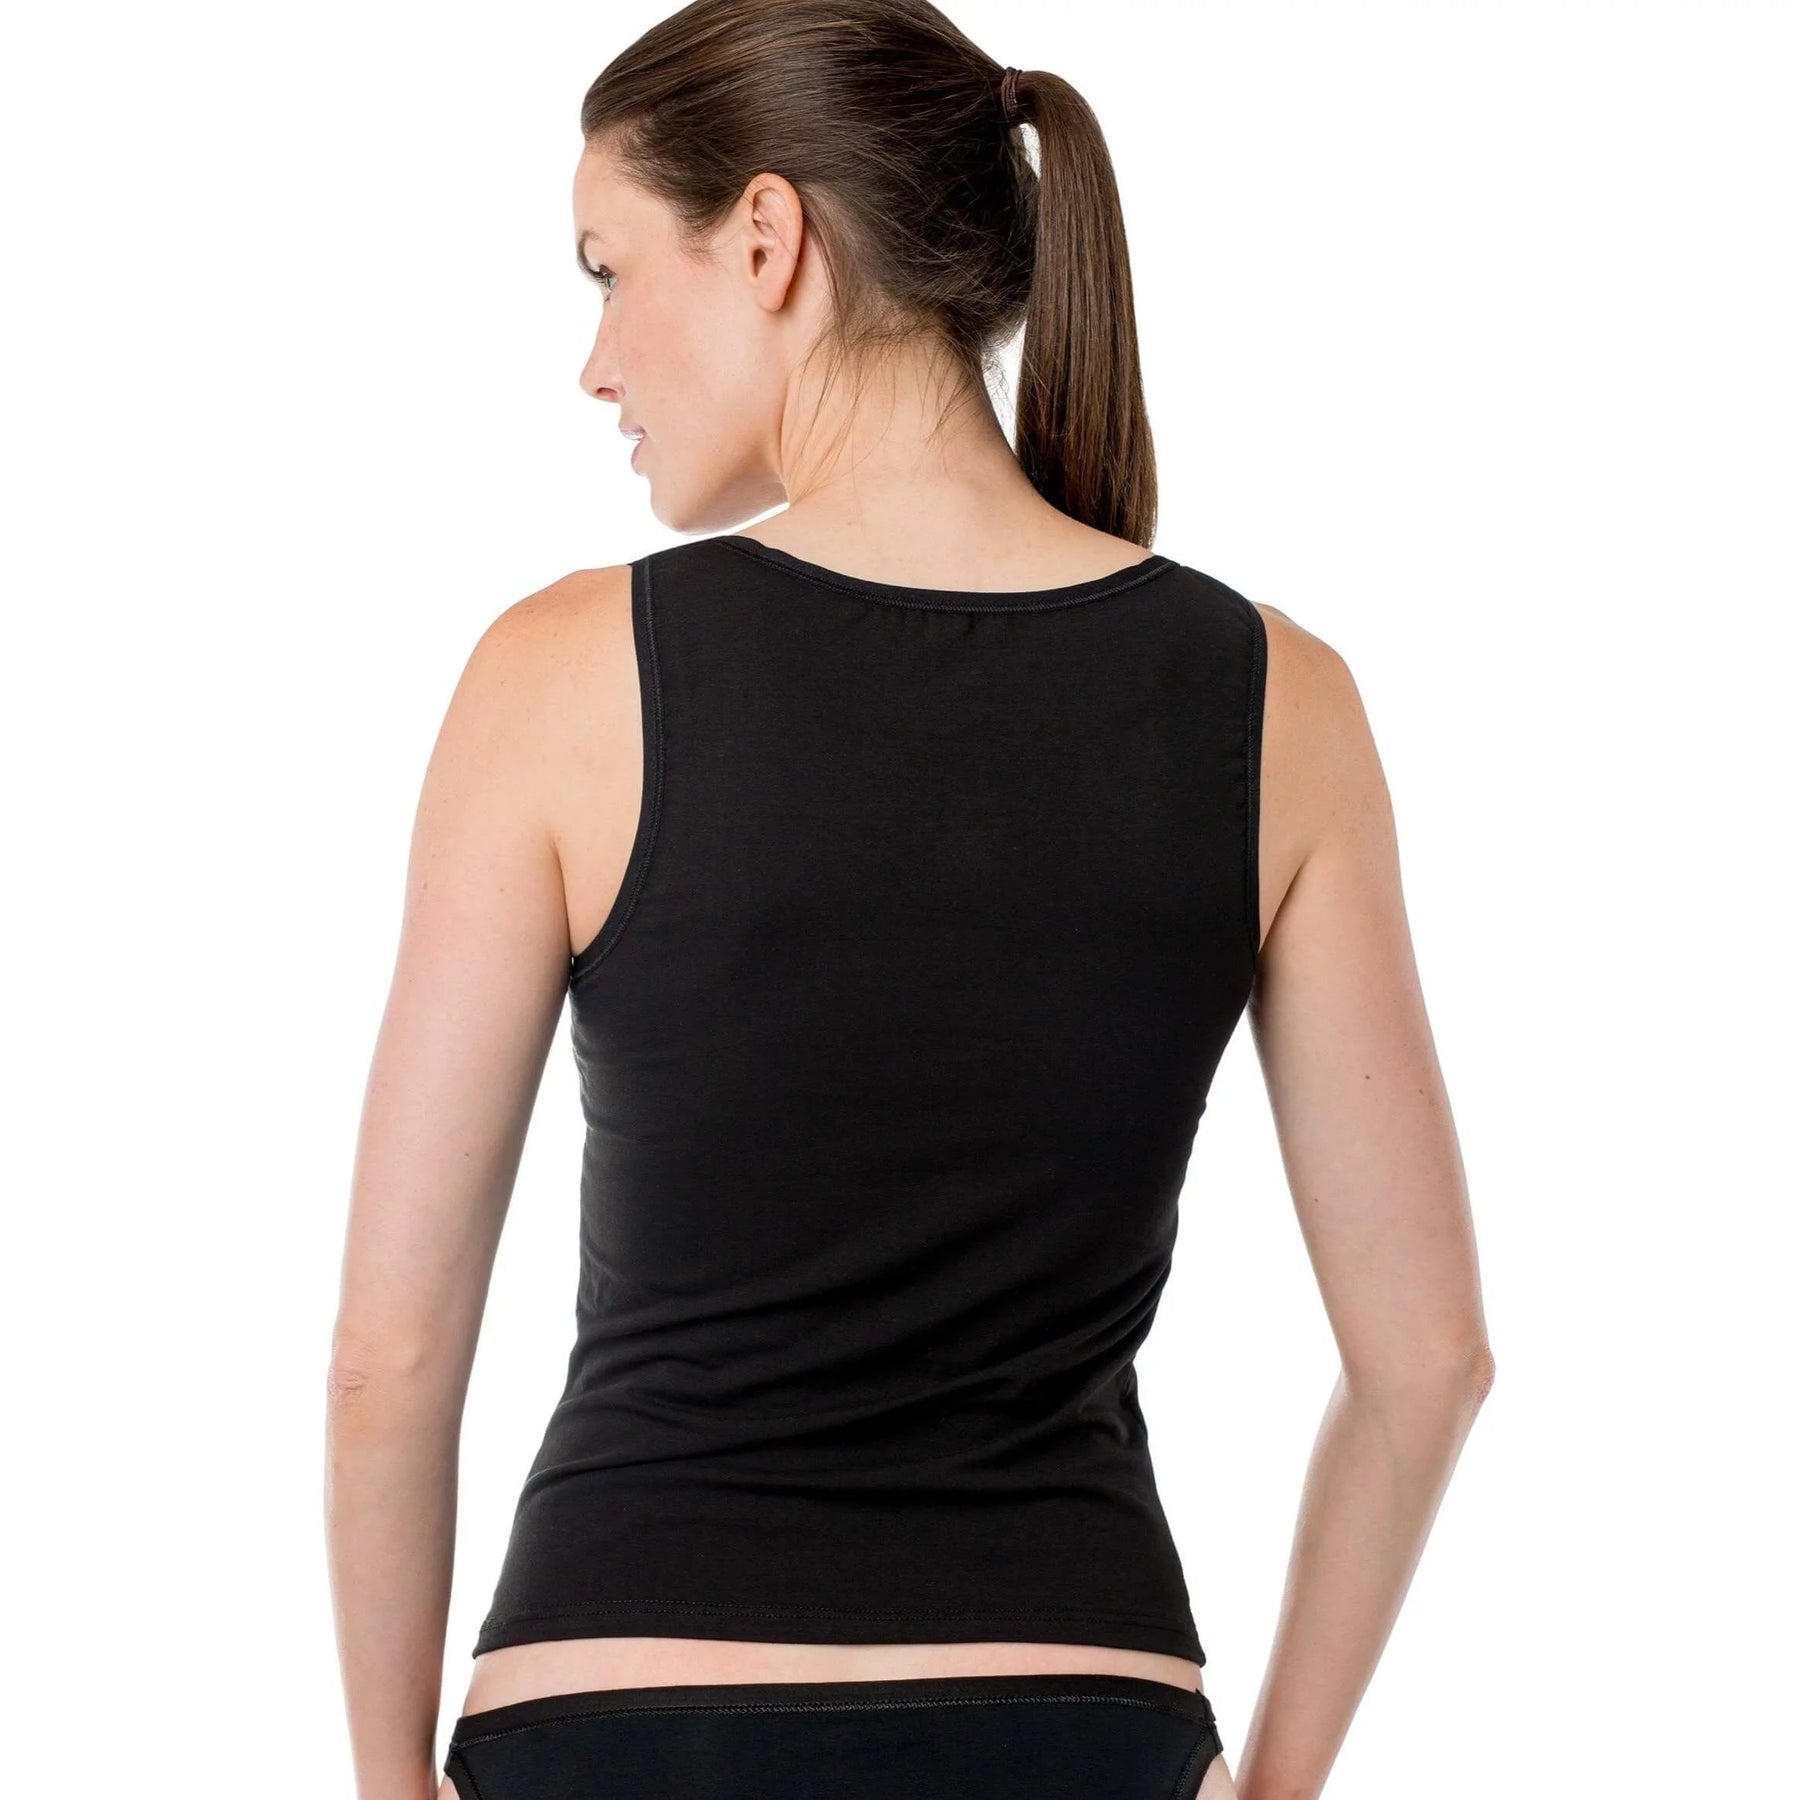 Buy AYESAFF Women's Cotton Regular Camisole Inner Wear Top Combo Pack of 3  at